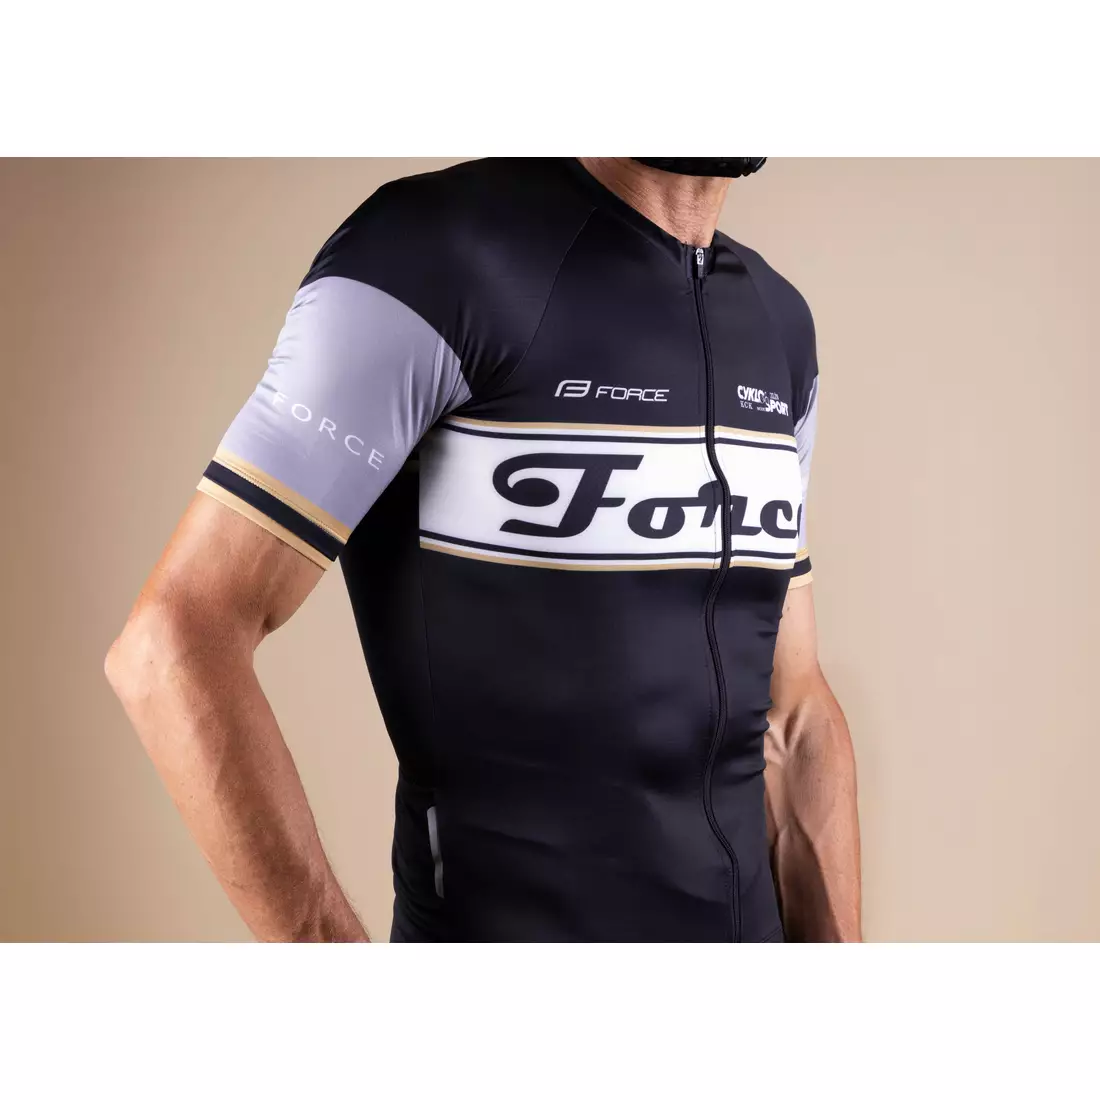 FORCE cycling jersey RETRO, black and gold 9001193